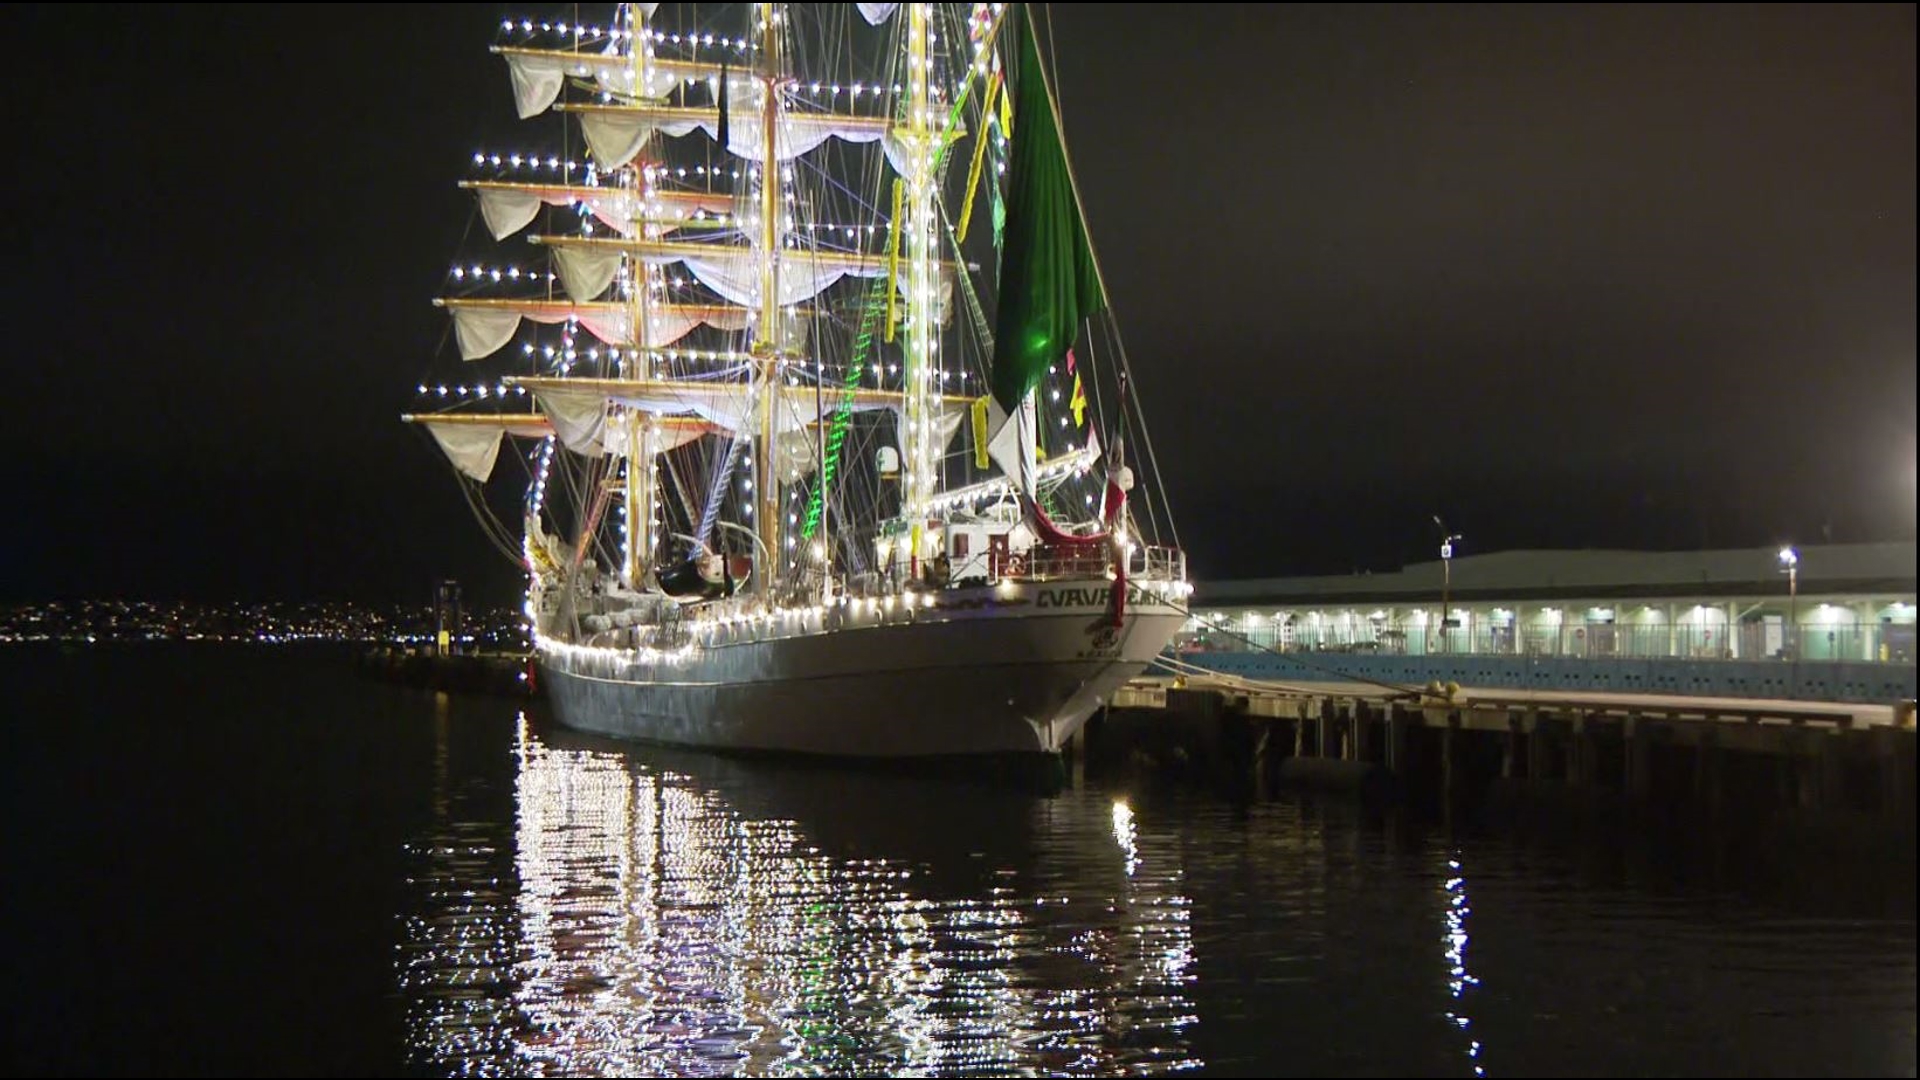 The ship known as the Cuauhtémoc, is visiting San Diego from May 16 through May 20 and you can see it for free this weekend.